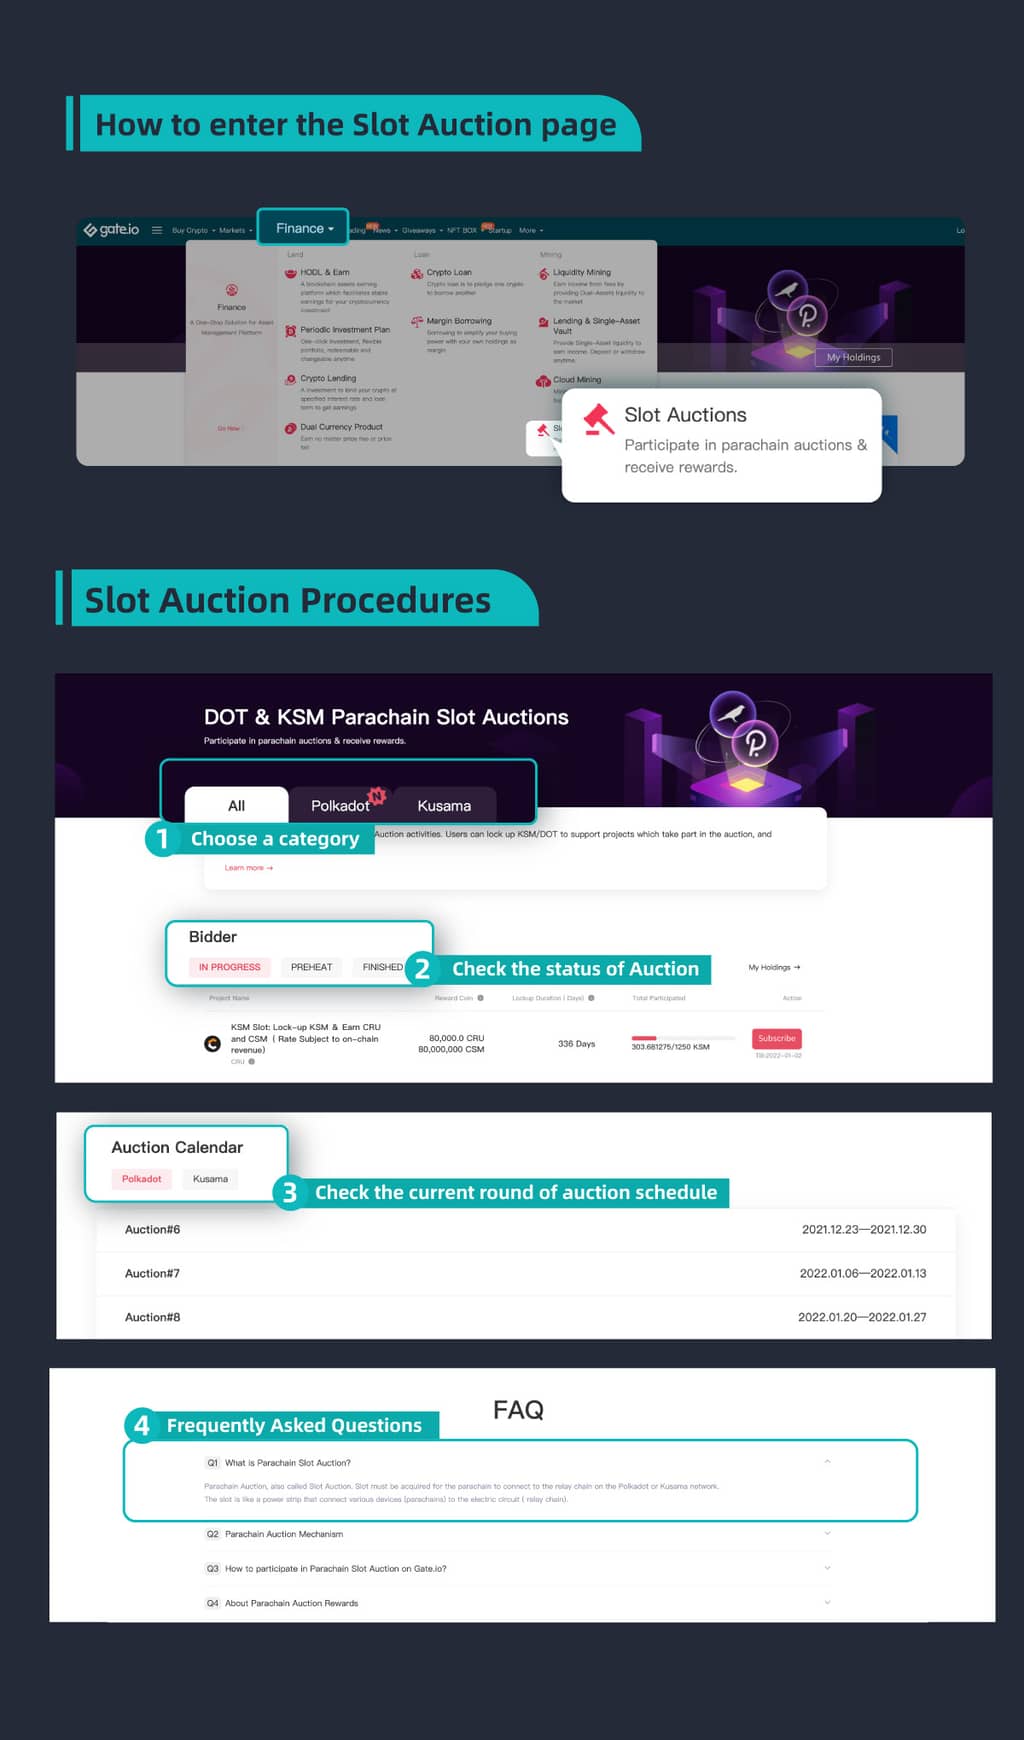 Gate.io Join the KSM & DOT Slot Auction with One-Click on Gate.io（Polkadex will be delisted in advance）